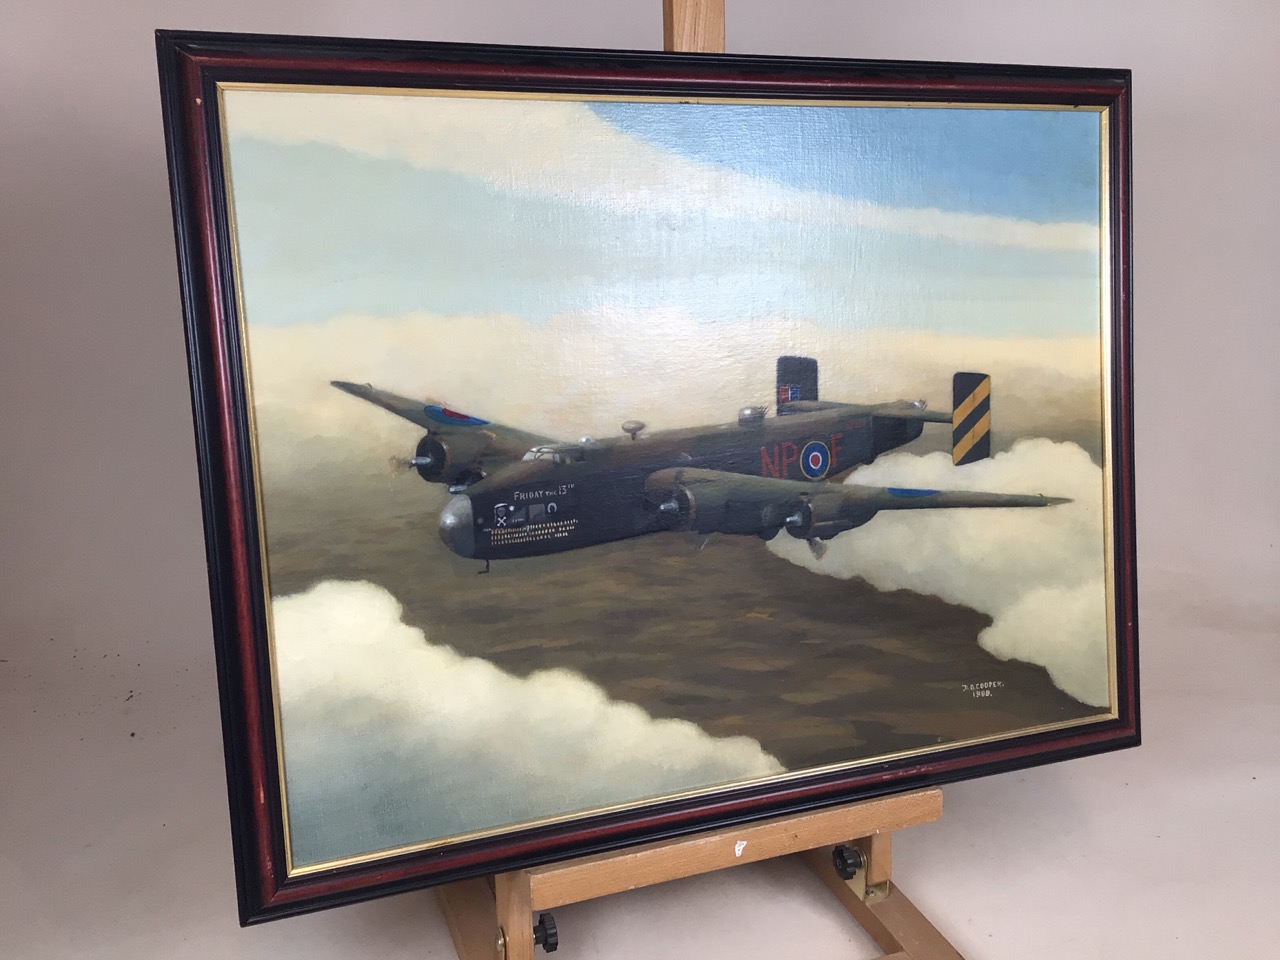 An oil on board of a WW1 bomber by. D.N COOPER 1988. Friday the 13th. Together with a similar